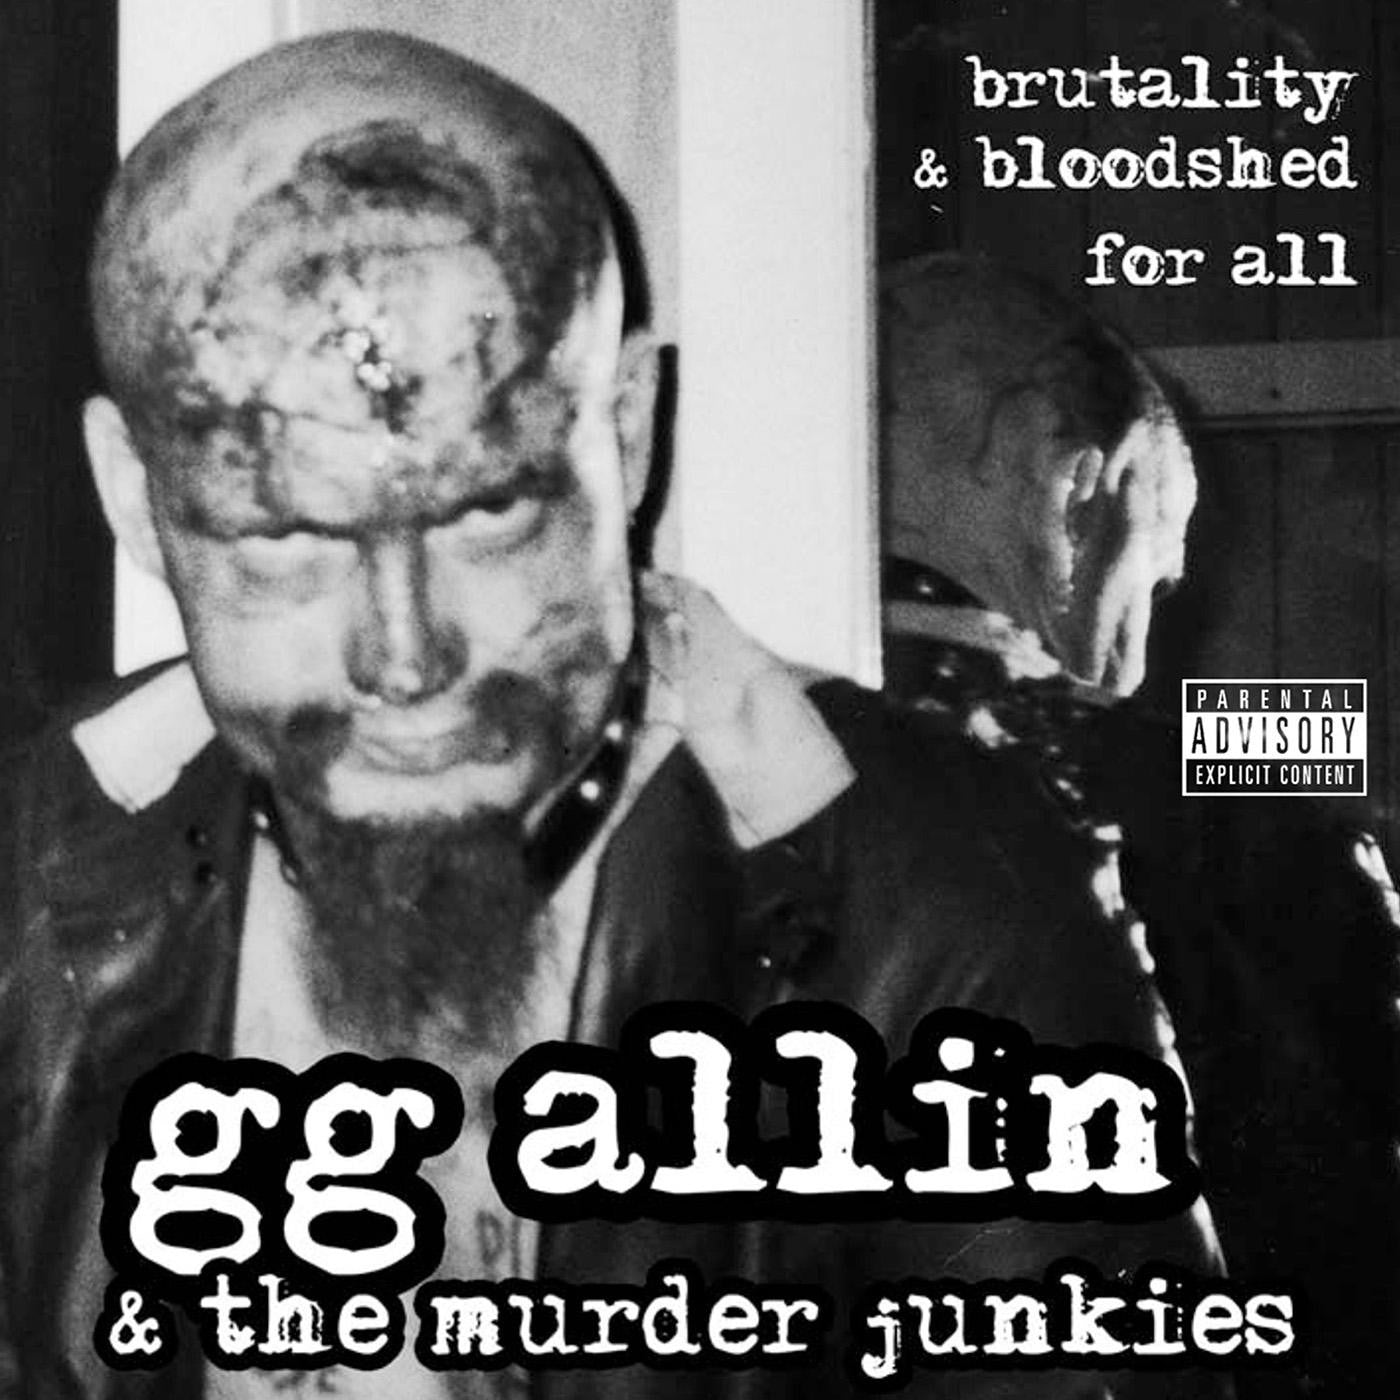 GG ALLIN - BRUTALITY AND BLOODSHED FOR ALL Vinyl LP